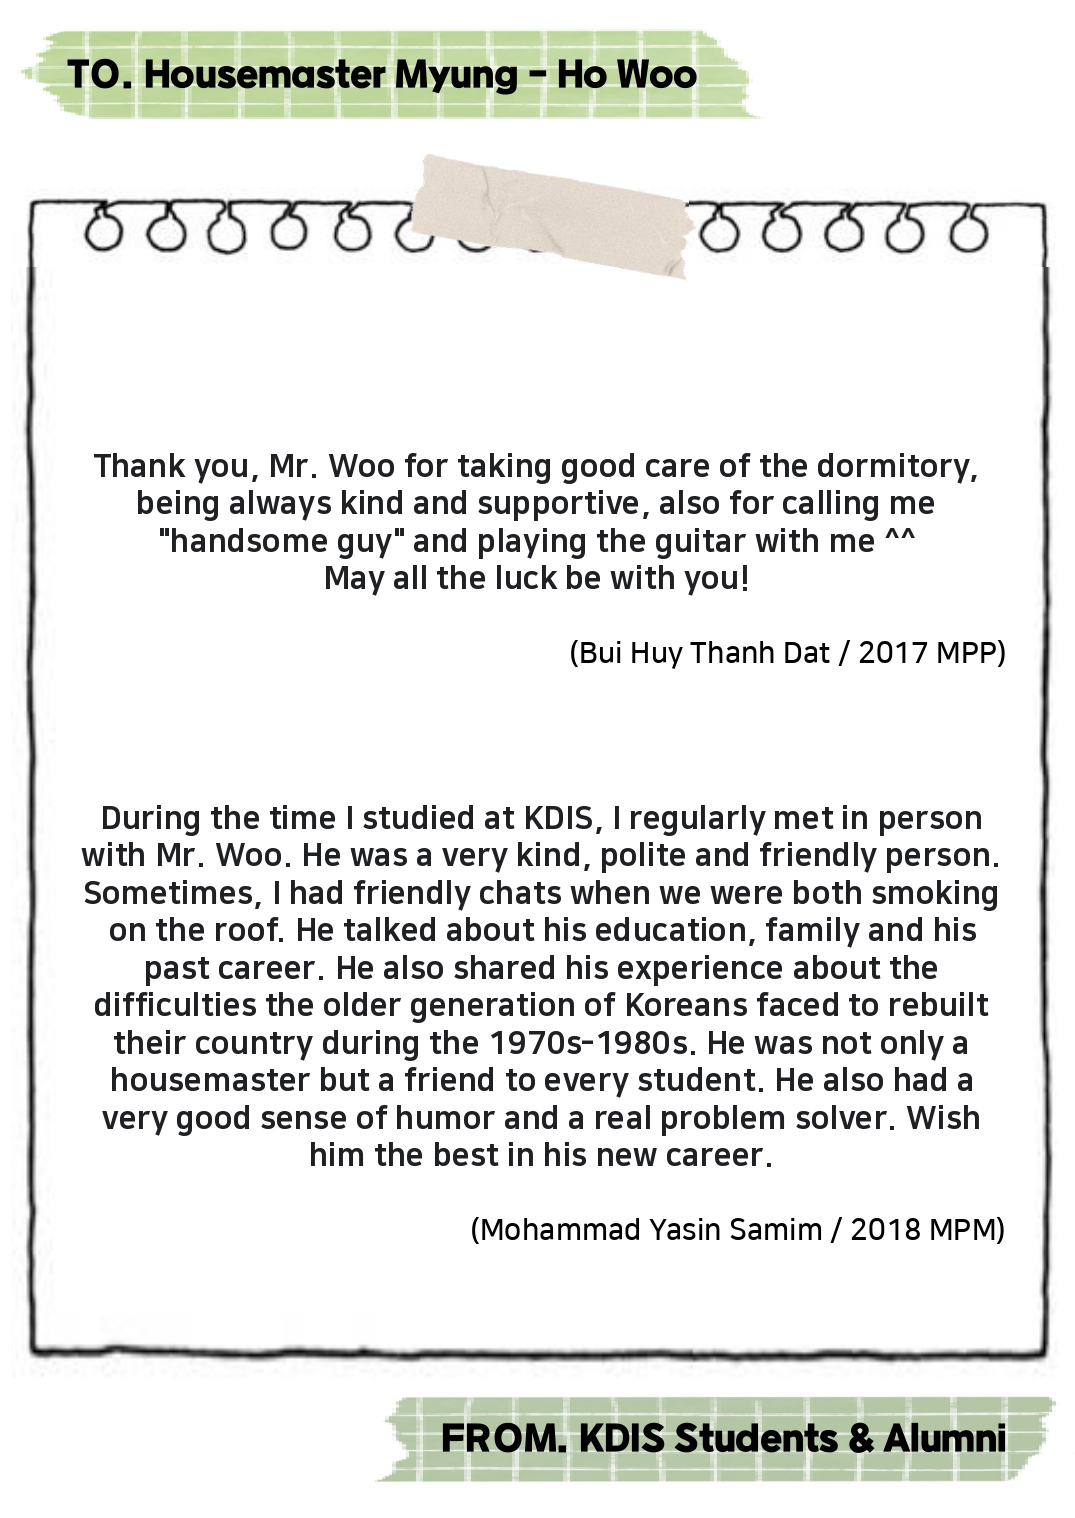 Thank you Housemaster Myung-ho Woo -Messages from KDIS Students and Alumni 사진23